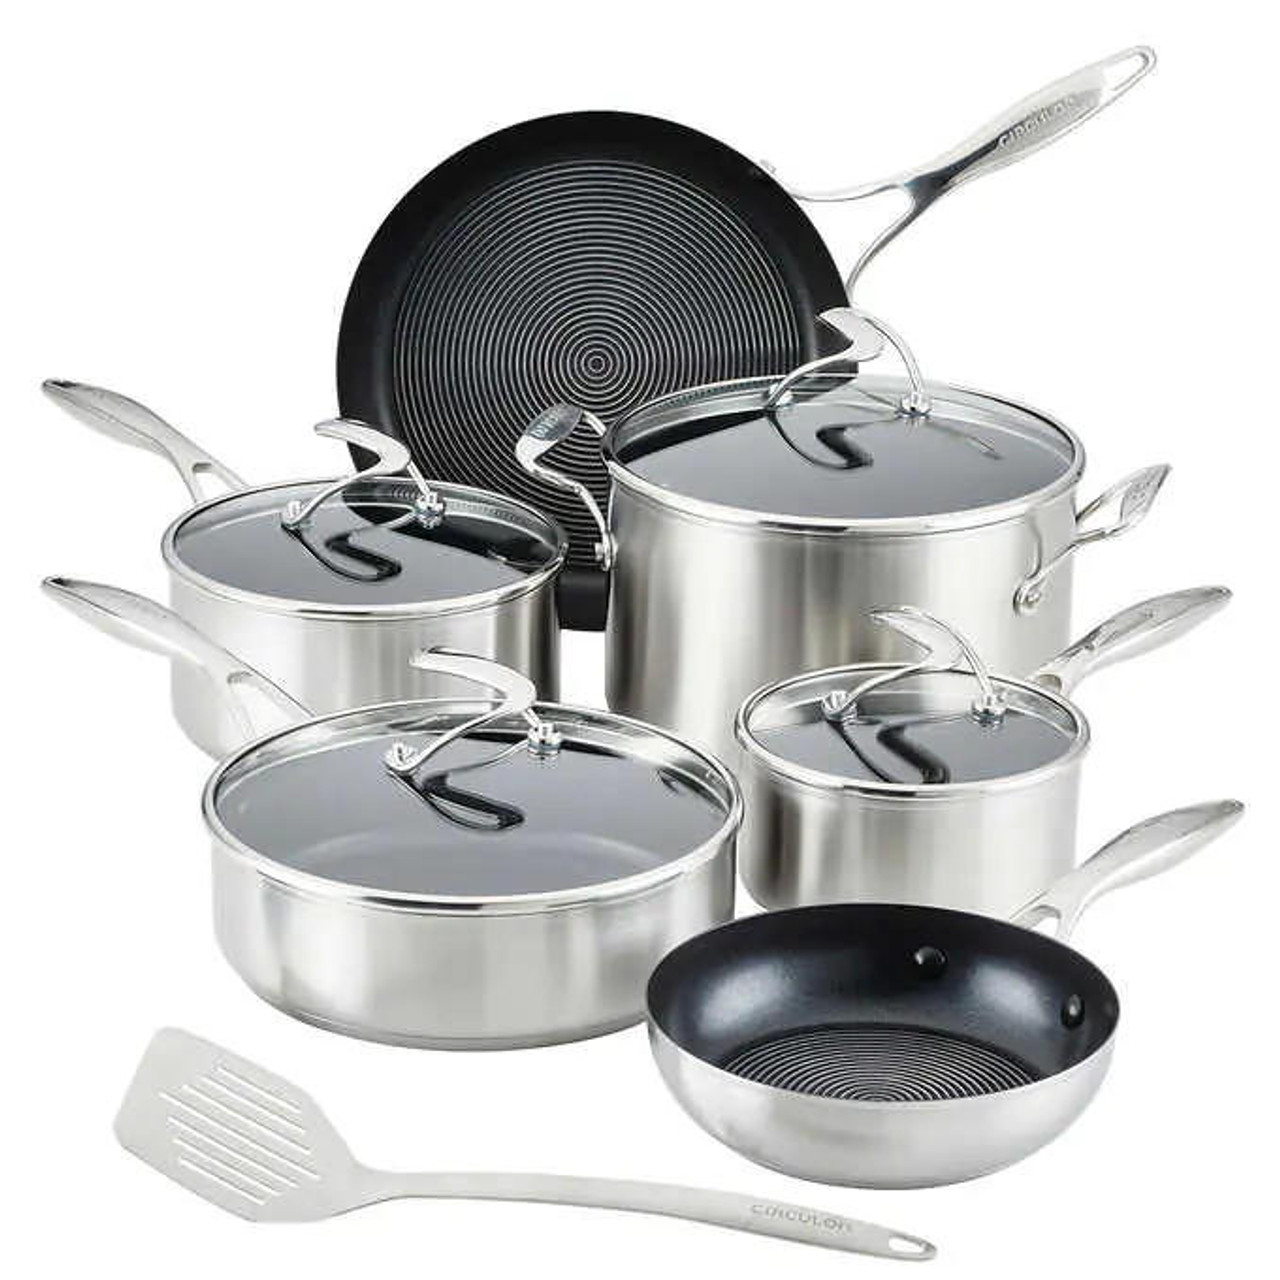 https://cdn11.bigcommerce.com/s-g5ygv2at8j/images/stencil/1280x1280/products/13669/30491/circulon-s-series-stainless-steel-cookware-set-with-non-stick-interior-11-piece__44169.1692845381.jpg?c=1